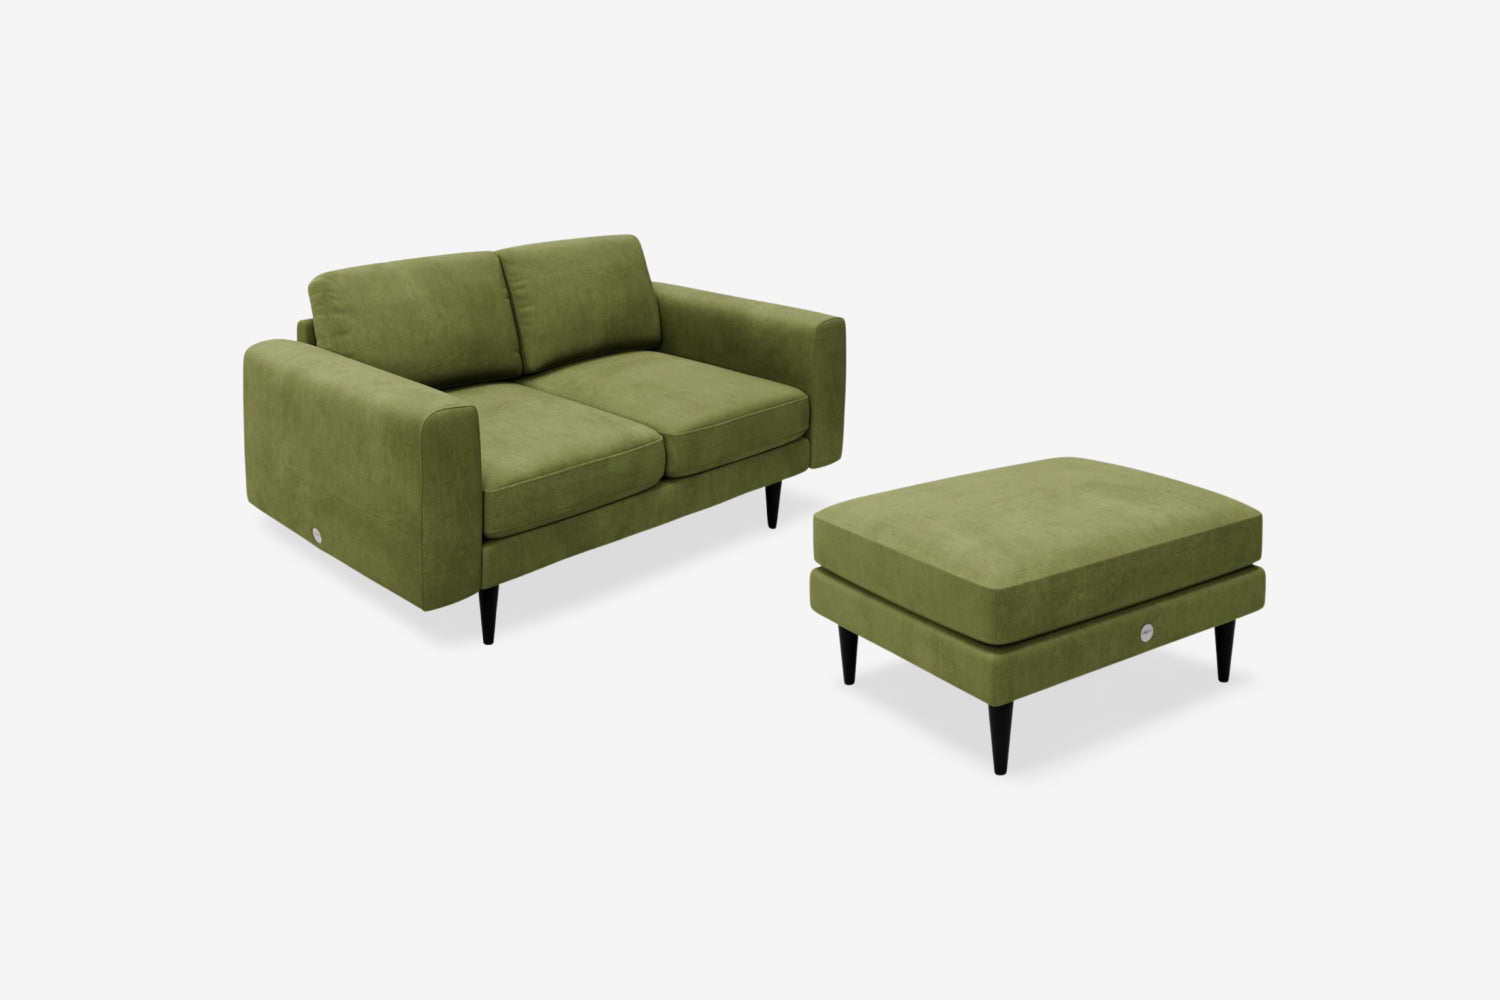 The Big Chill - 2 Seater Sofa and Footstool Set - Olive